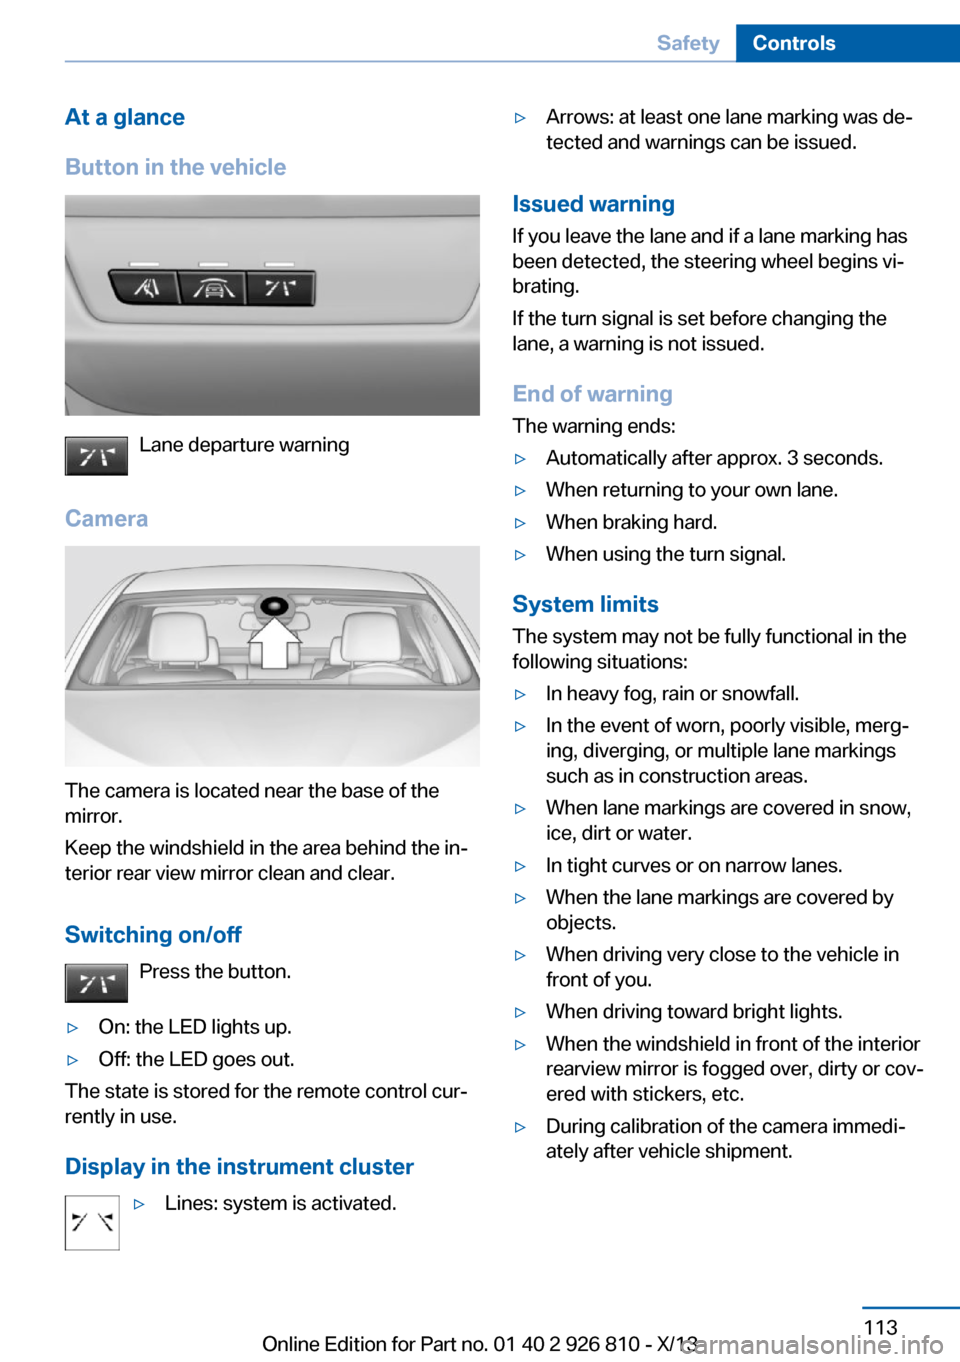 BMW 3 SERIES SEDAN 2013 F30 Owners Manual At a glance
Button in the vehicle
Lane departure warning
Camera
The camera is located near the base of the
mirror.
Keep the windshield in the area behind the in‐
terior rear view mirror clean and cl